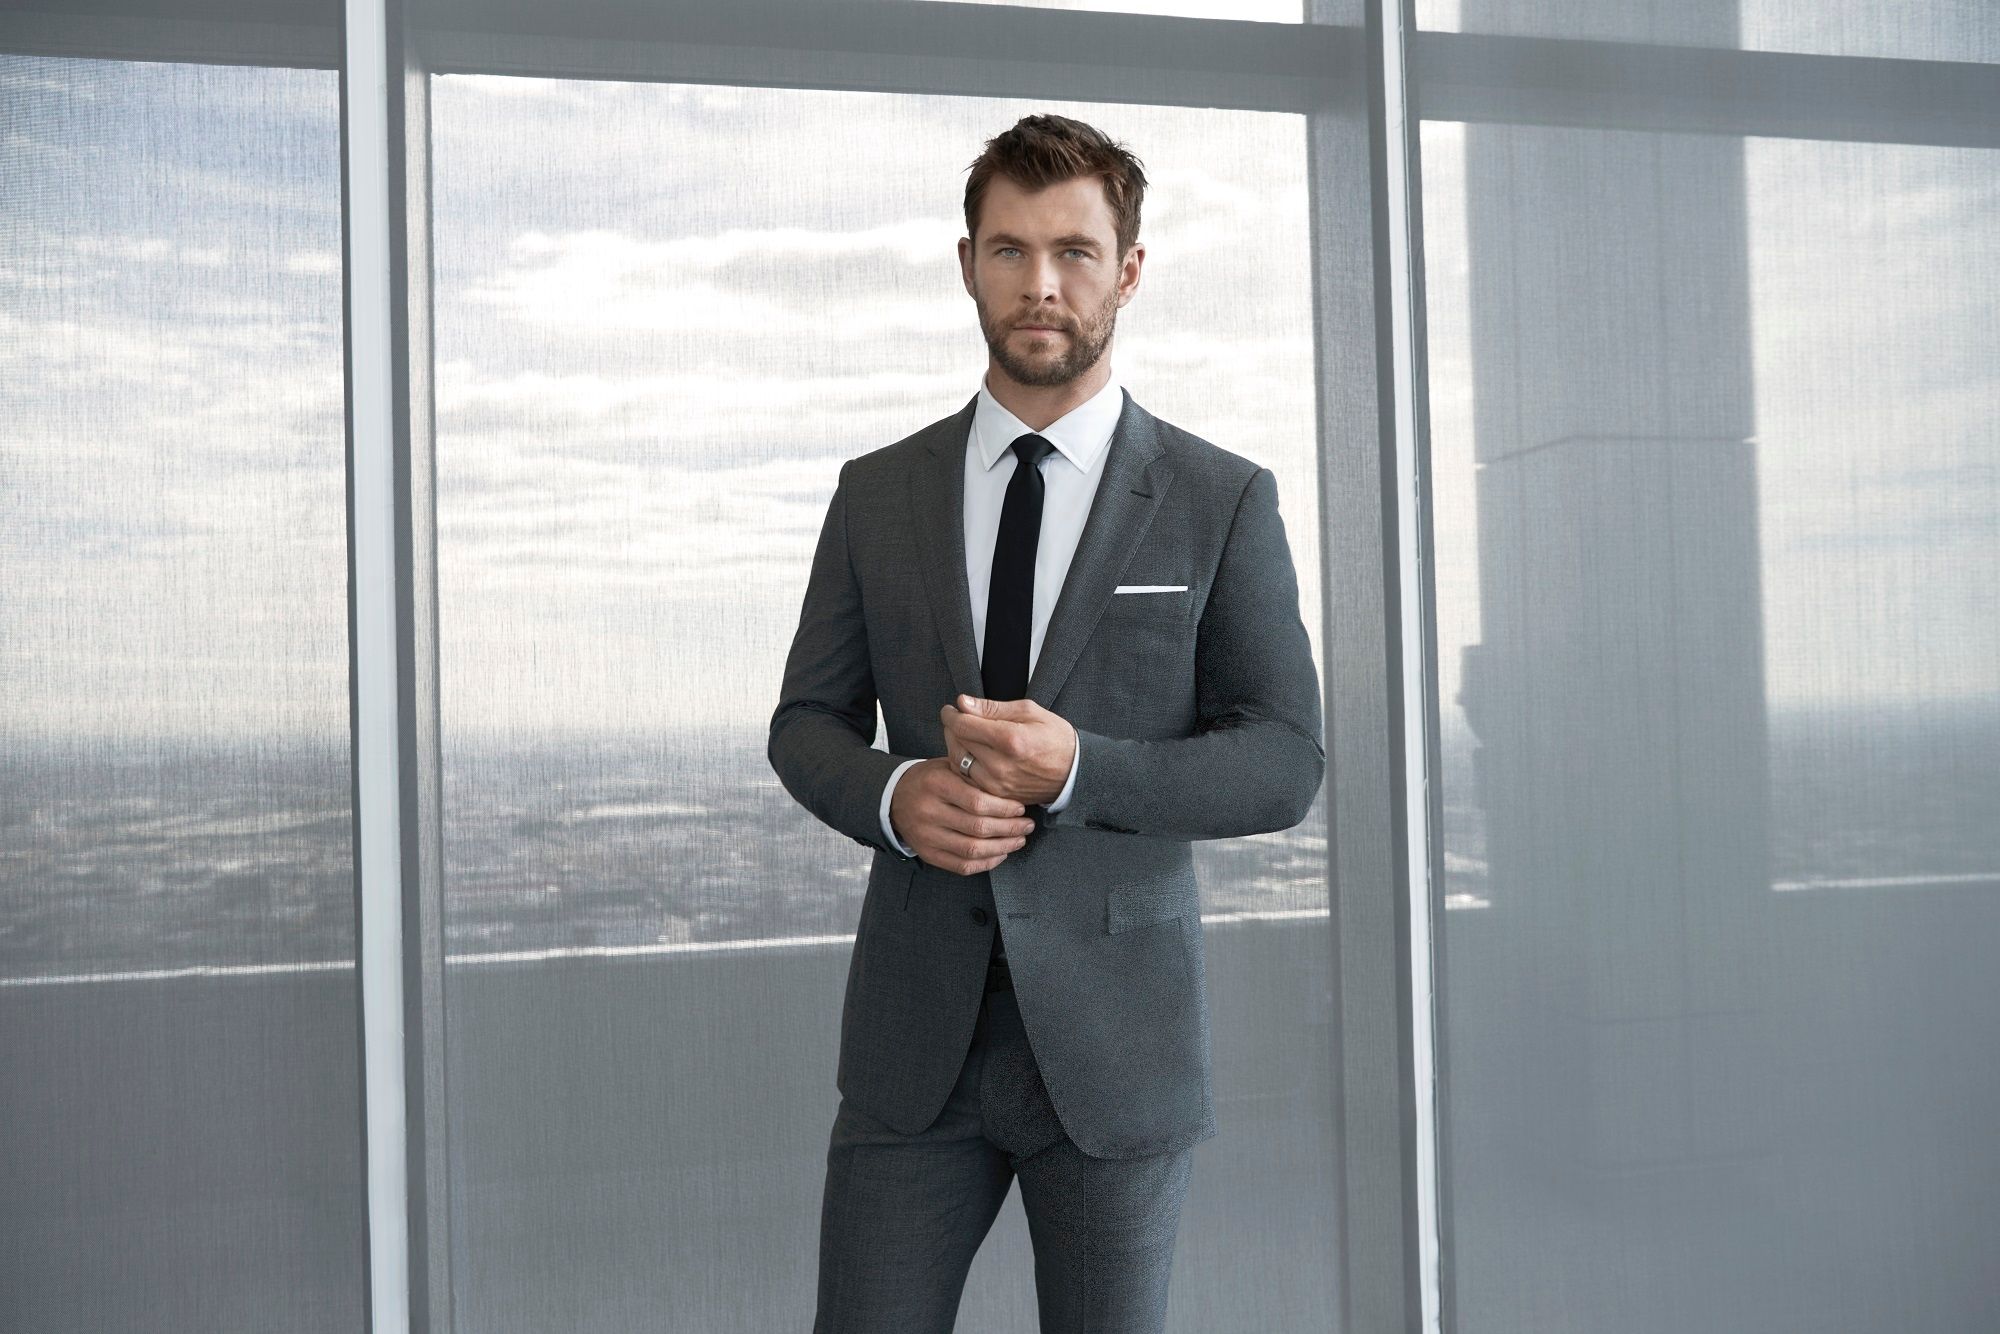 BOSS Bottled and Chris Hemsworth redefines what makes a man today